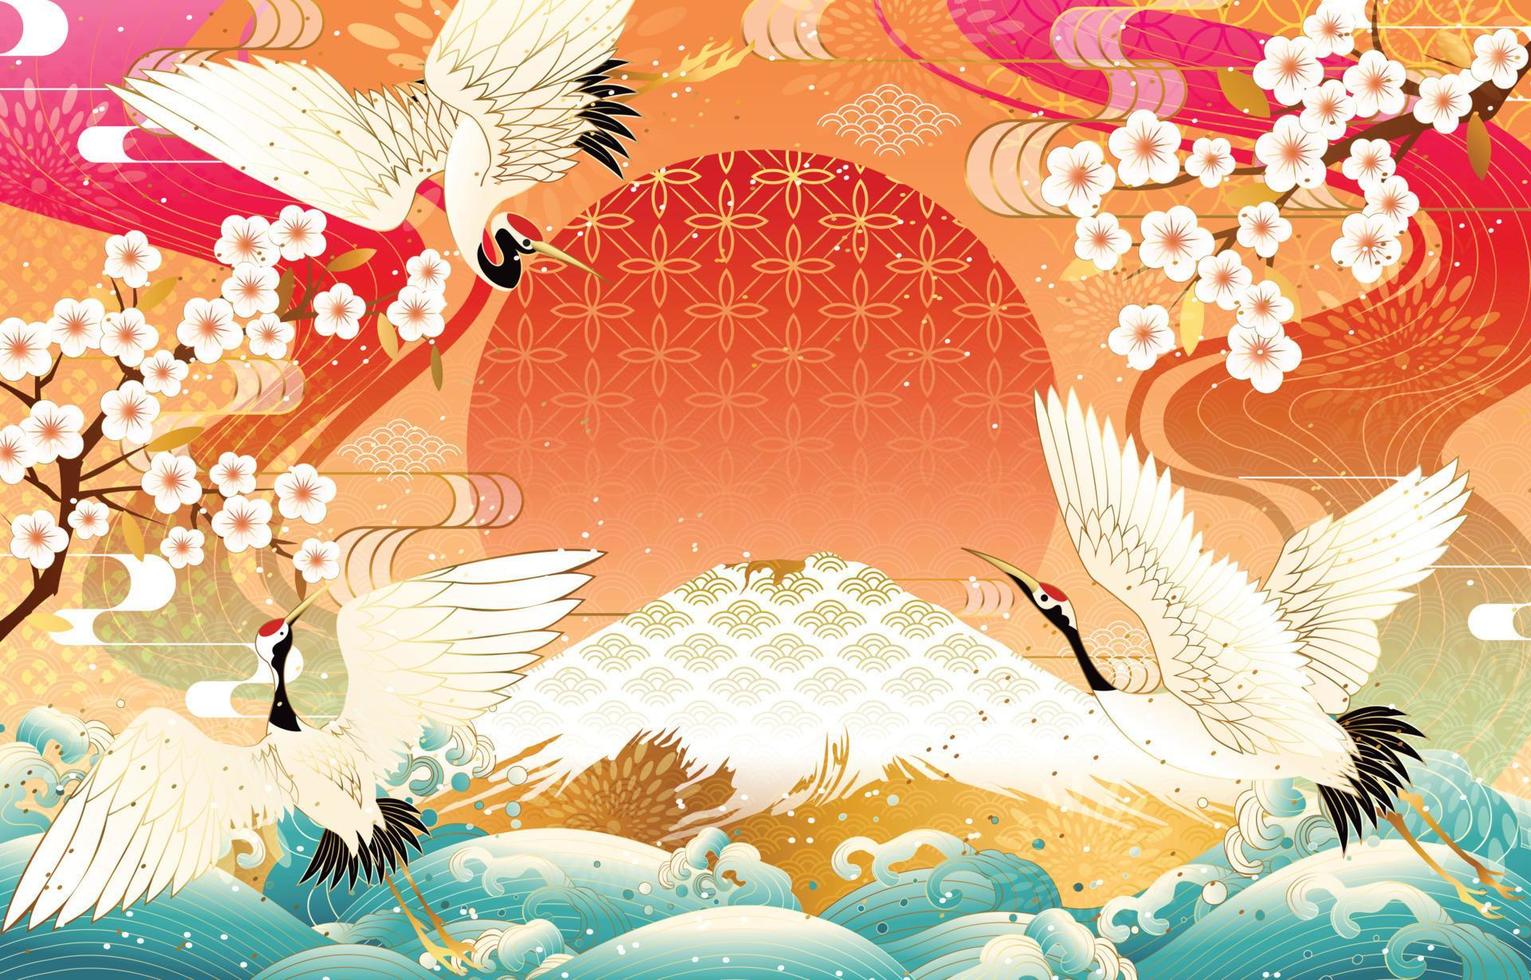 Japanese Style Element Concept with Cranes and Mount Fuji vector